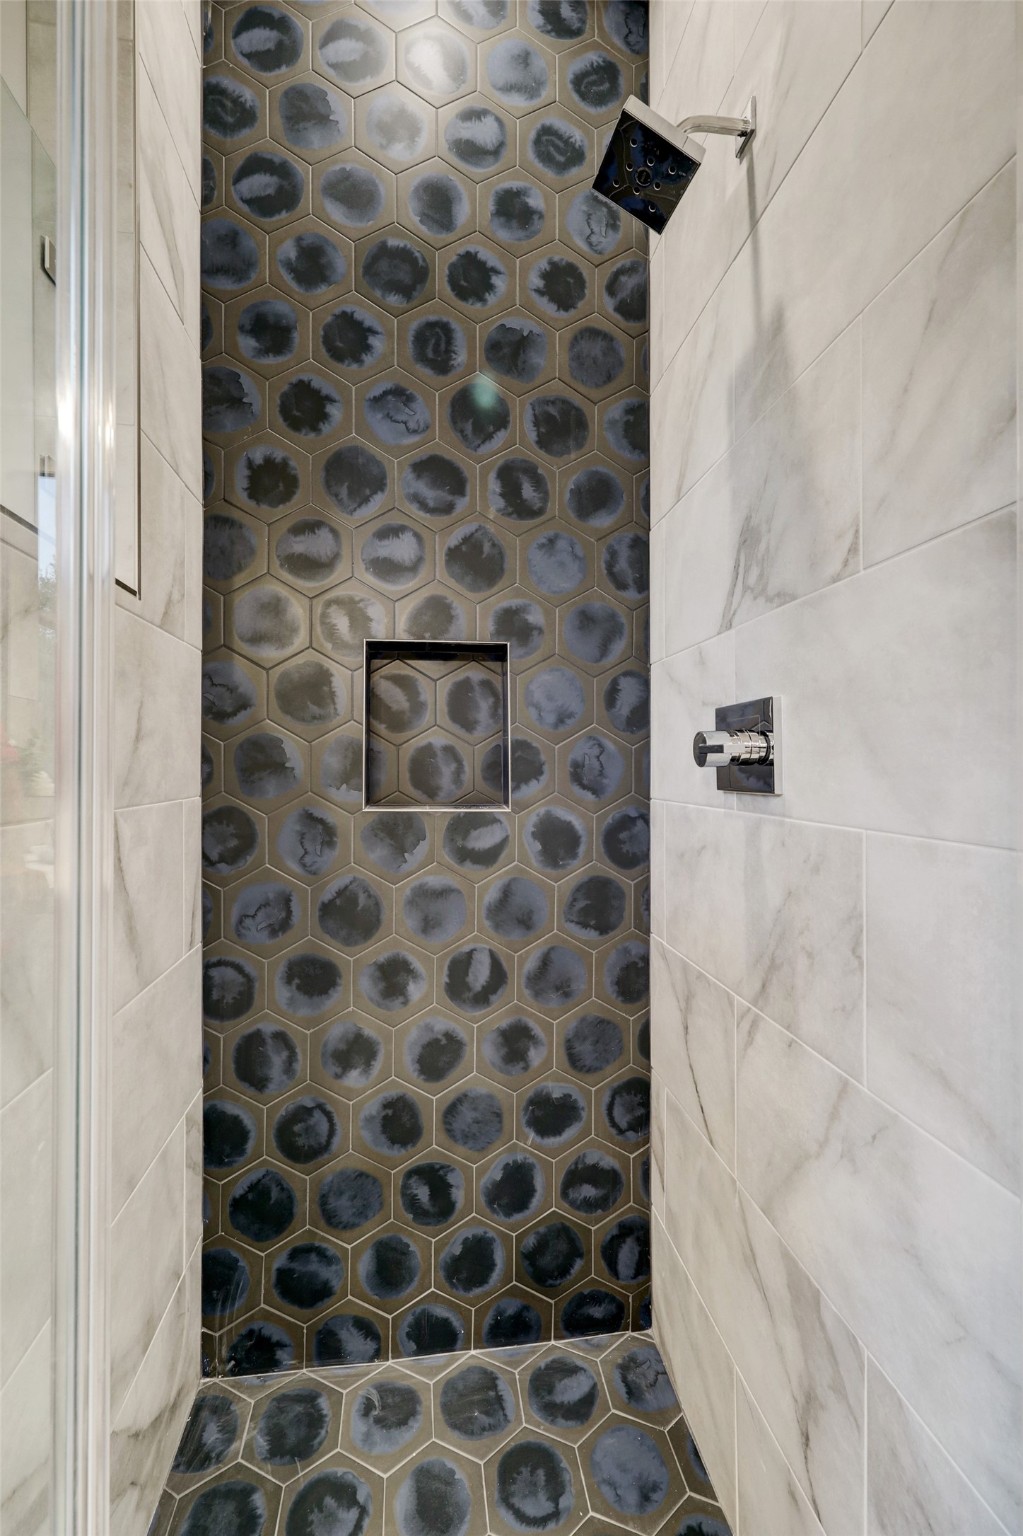 Down stairs walk in shower features gorgeous tile work and design.